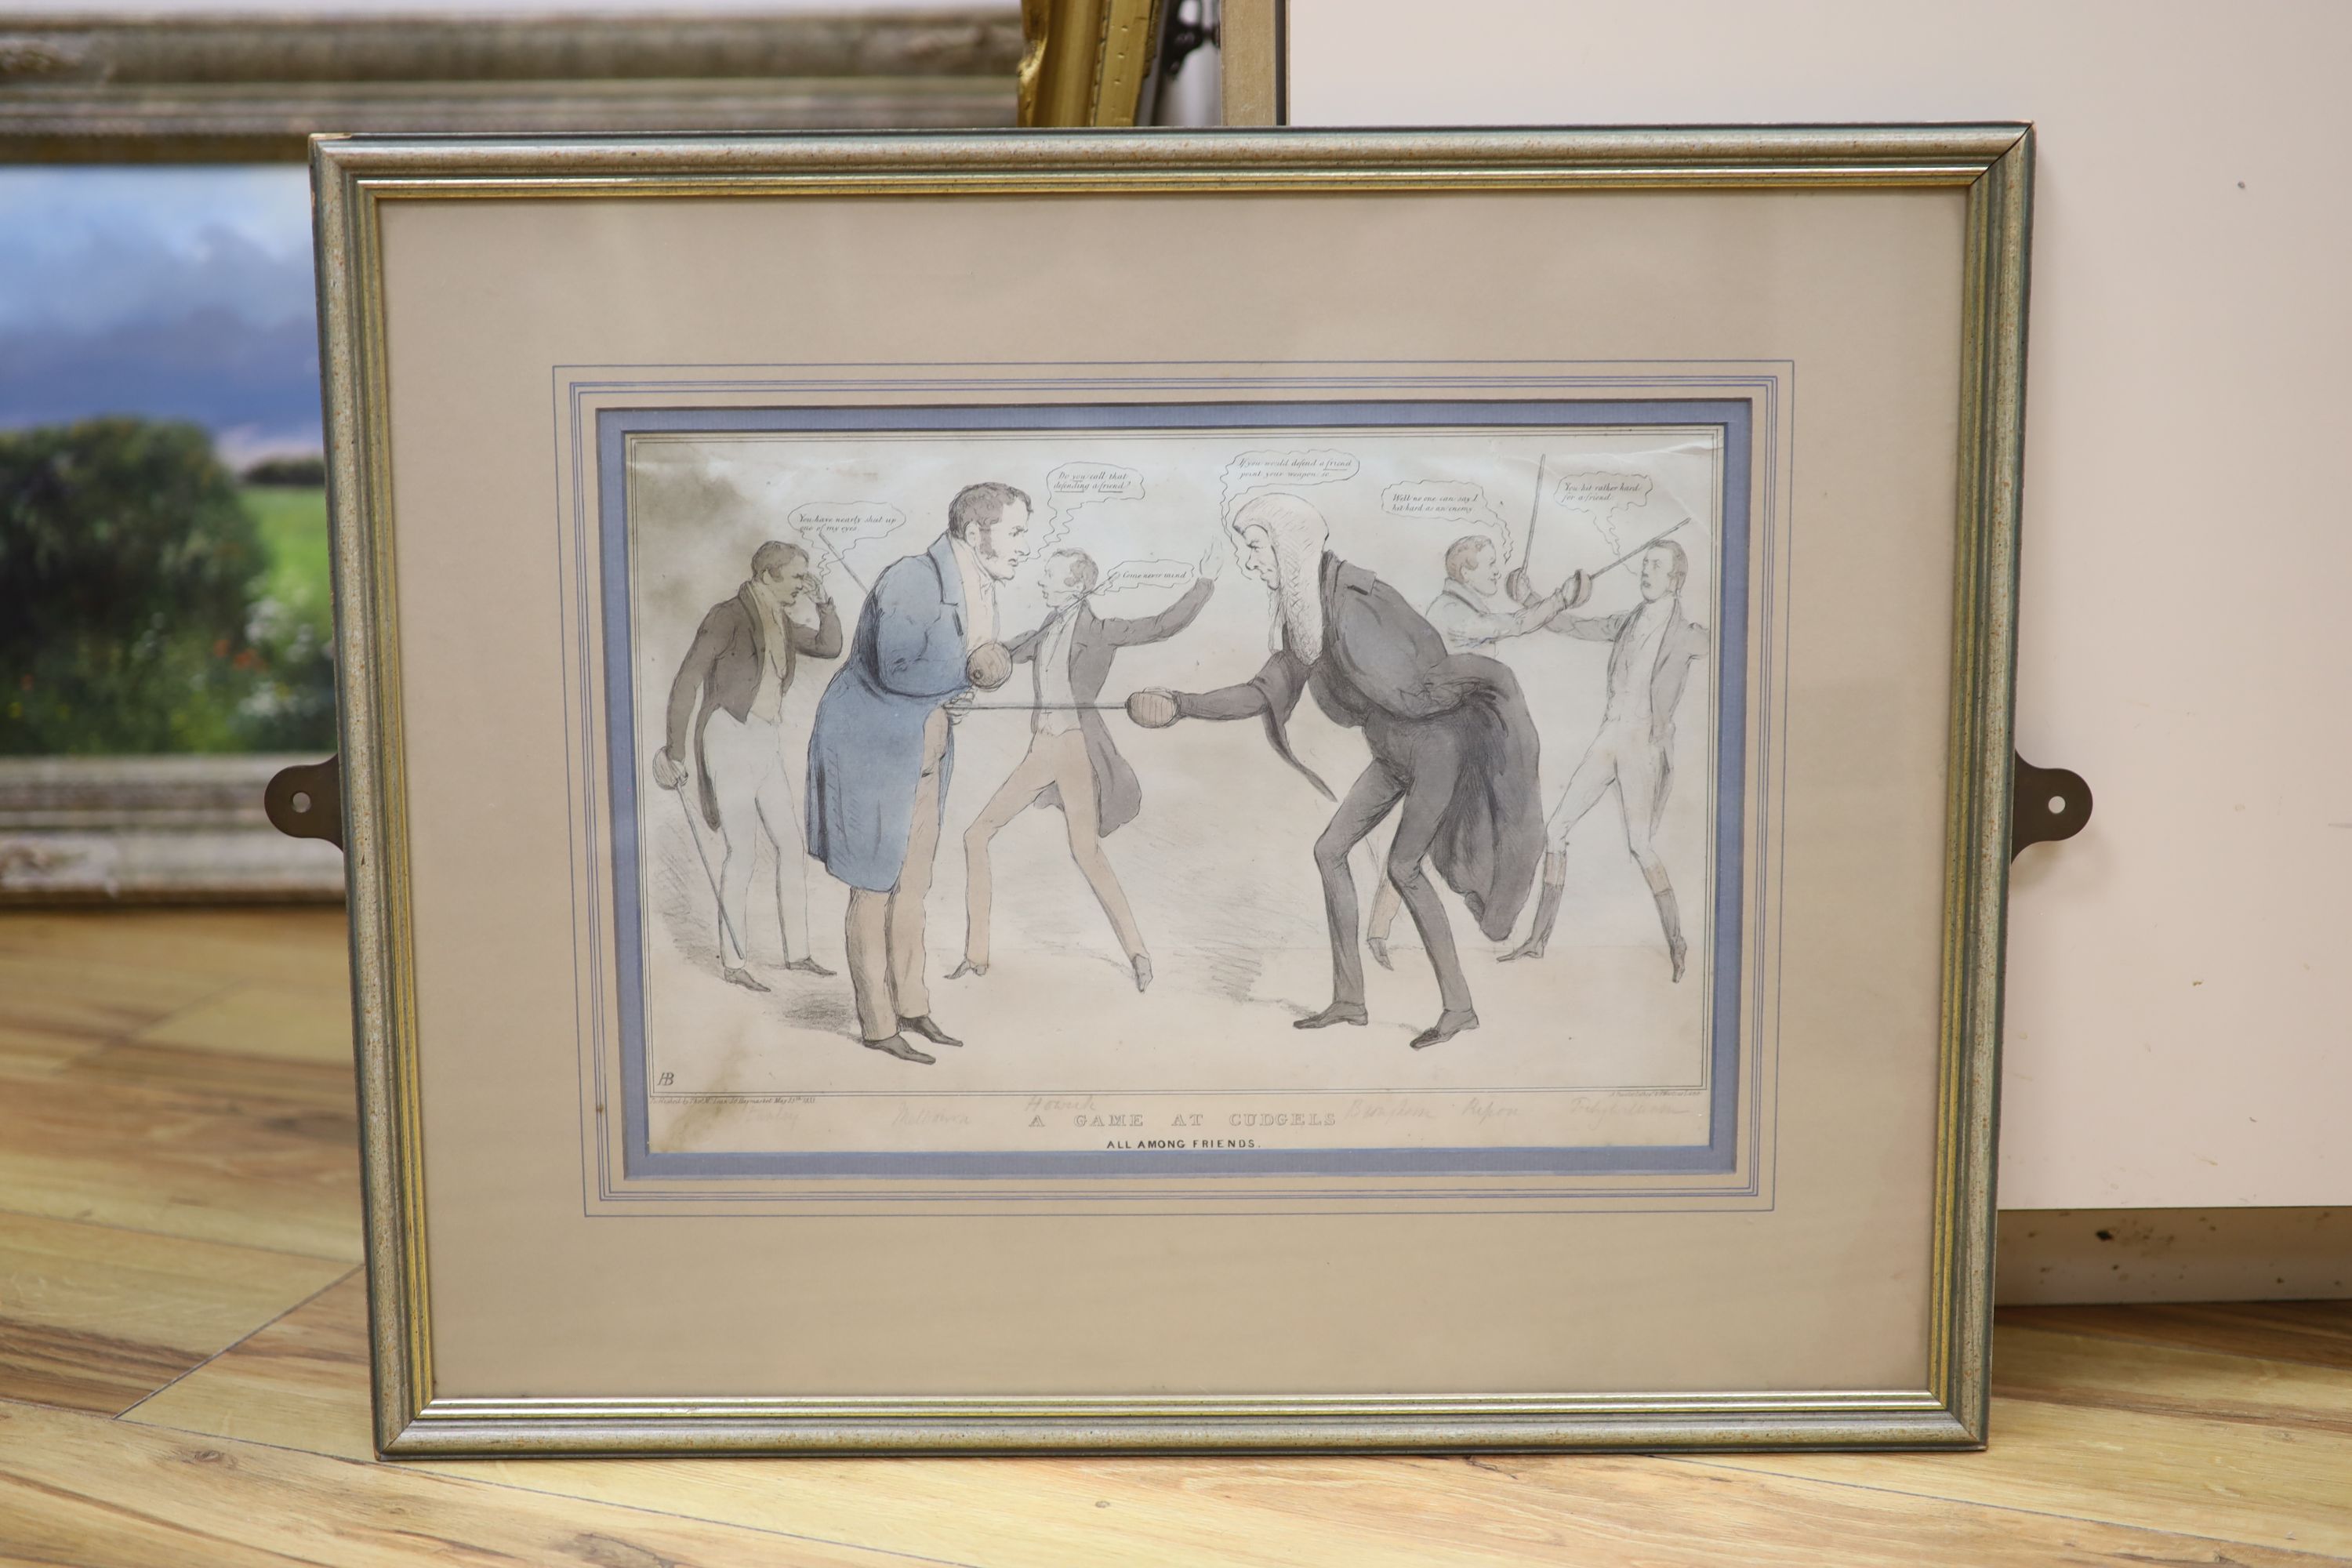 Thomas McLean publ., coloured lithograph, A game of Cudgels, all among friends, 25 x 37cm